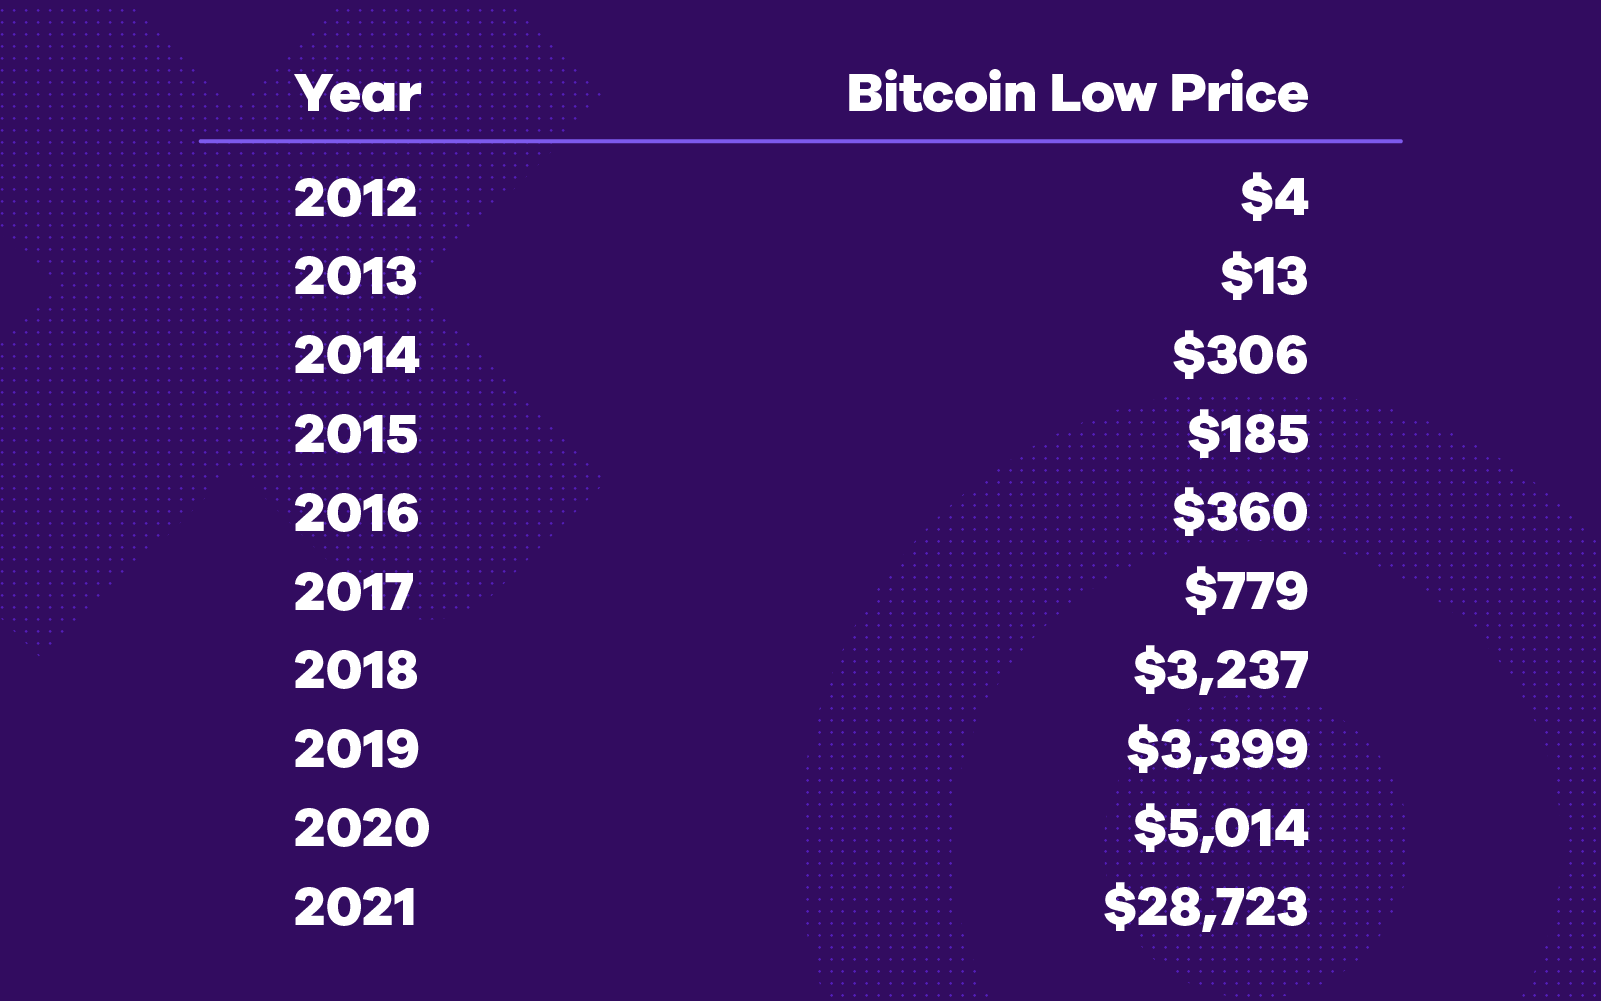 Bitcoin lowest price ever the capital expenditures budget is part of the planned investing activities of a company